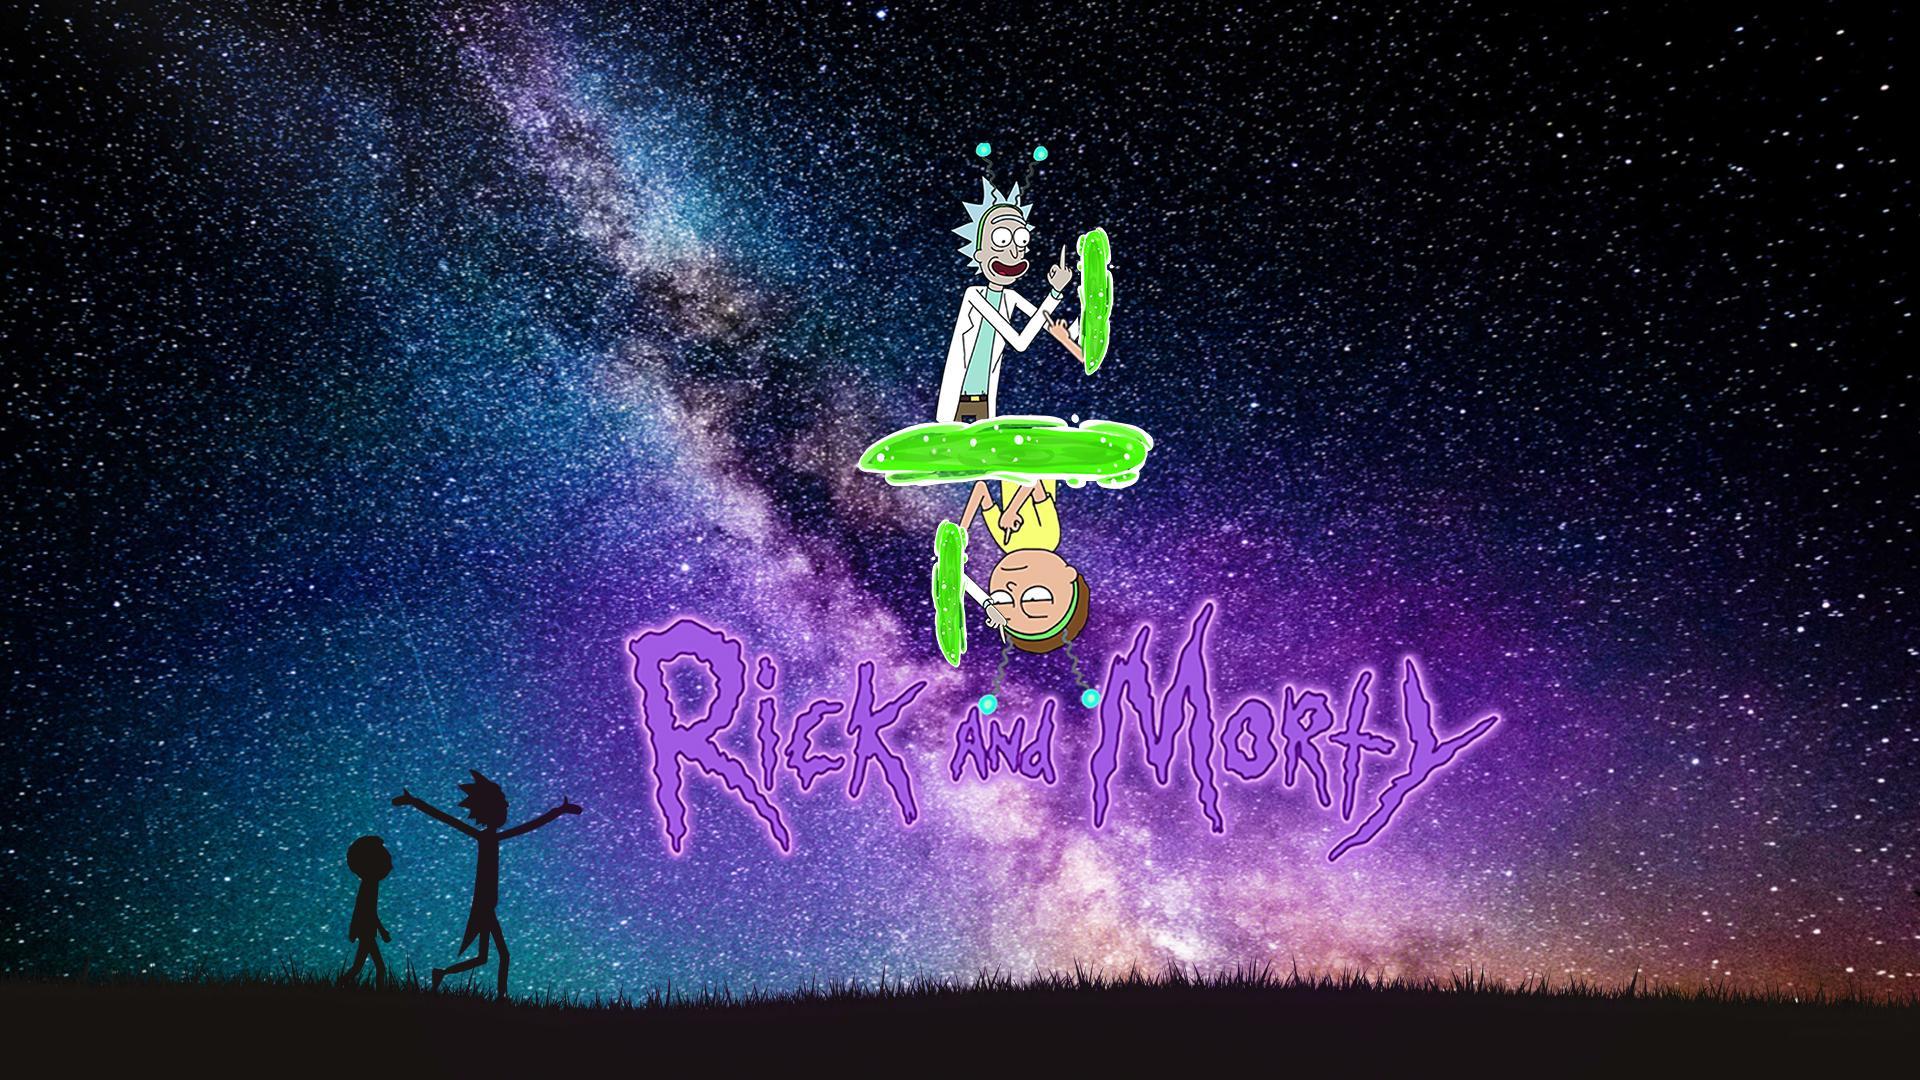 Best Rick and Morty Wallpaper Free Best Rick